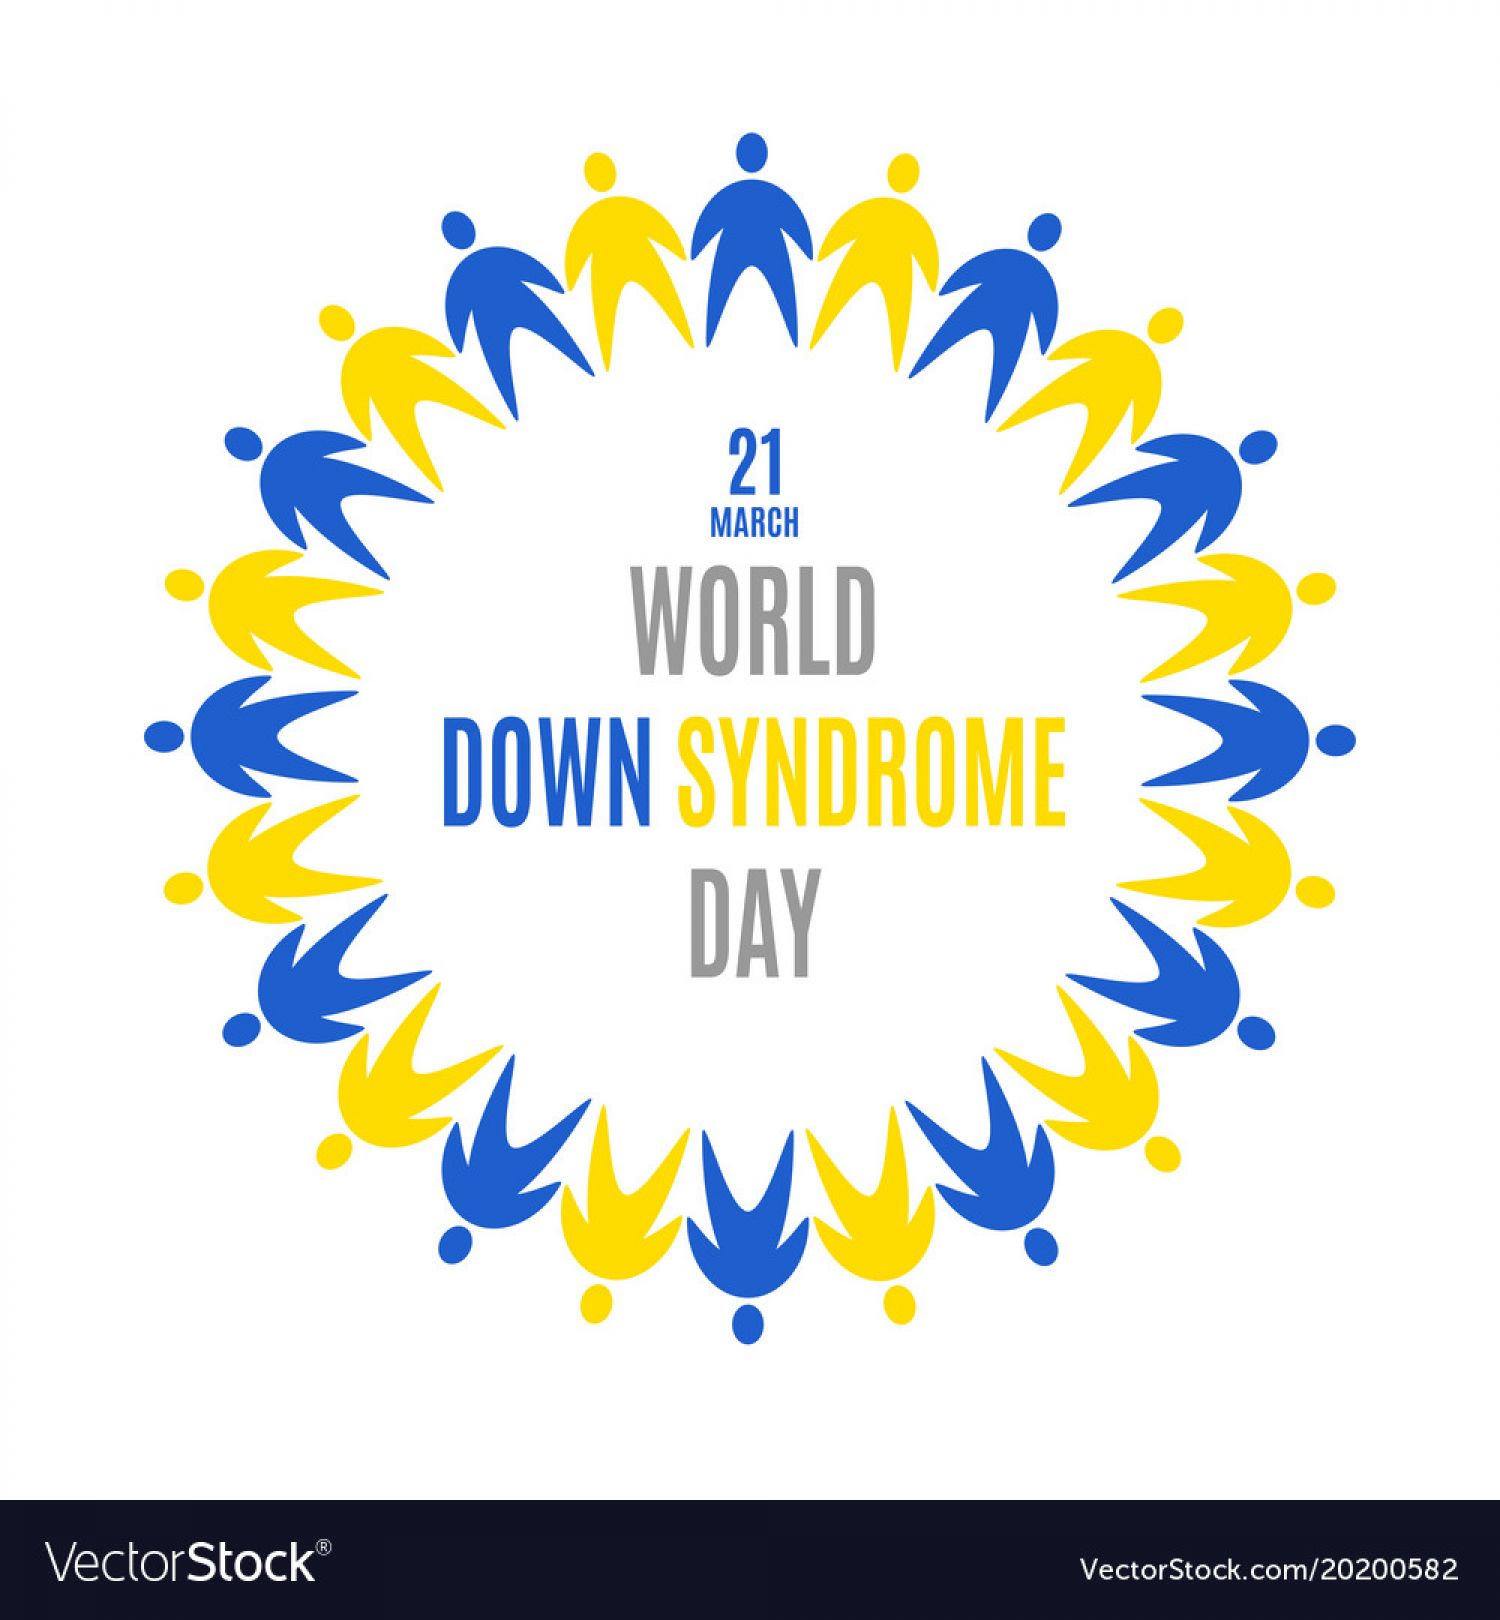 The Final Retrospective Blog - World Down Syndrome Day